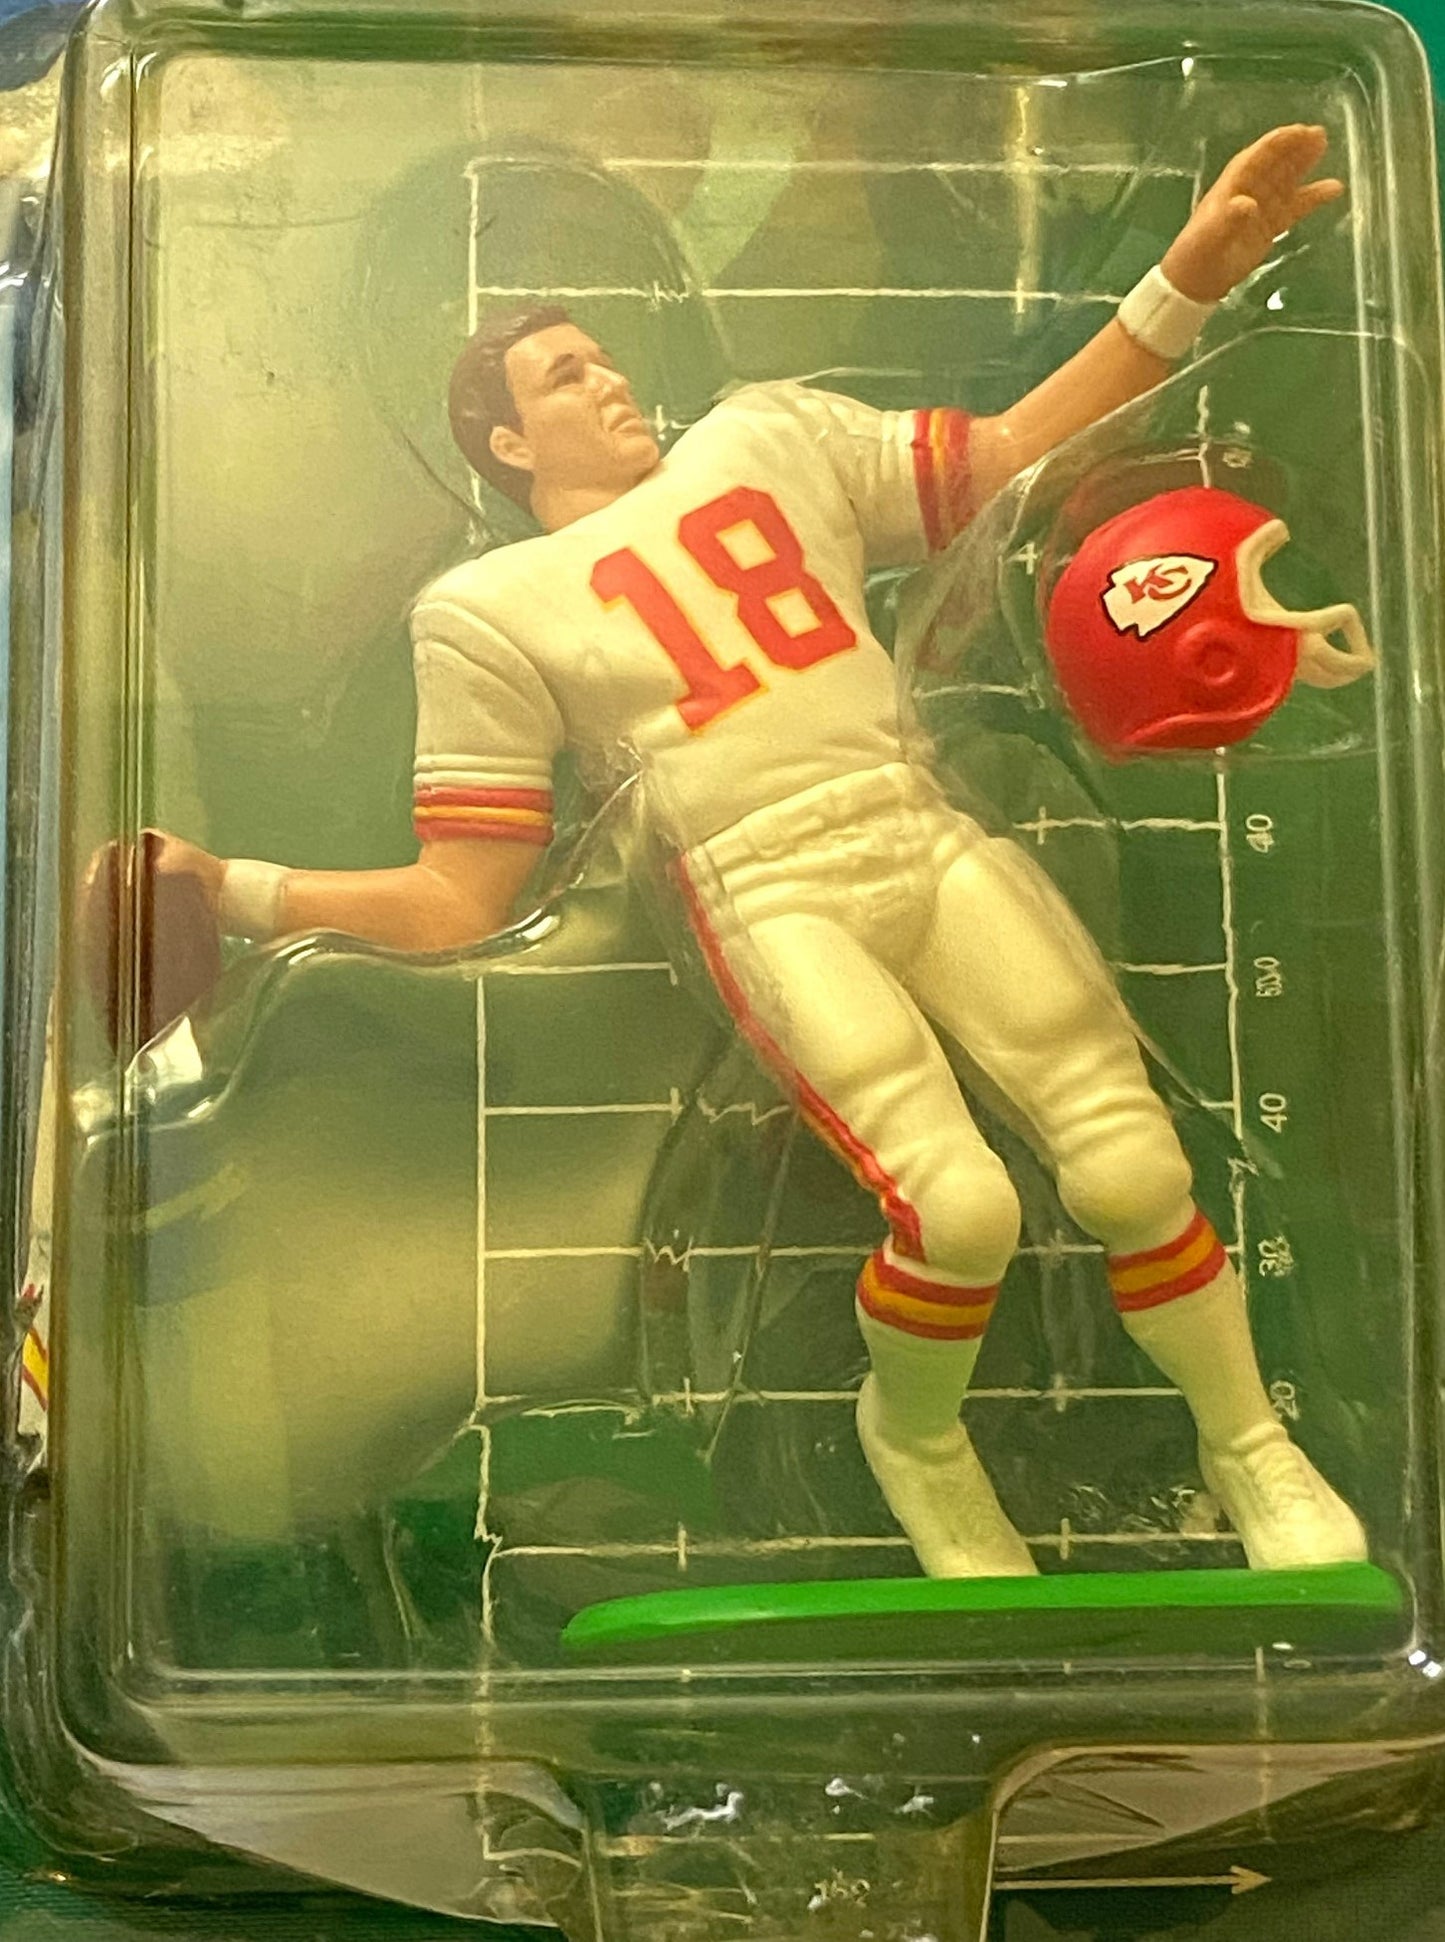 Elvis Grbac 1998 NFL KC Chiefs Starting Lineup Figurine NOS by Kenner